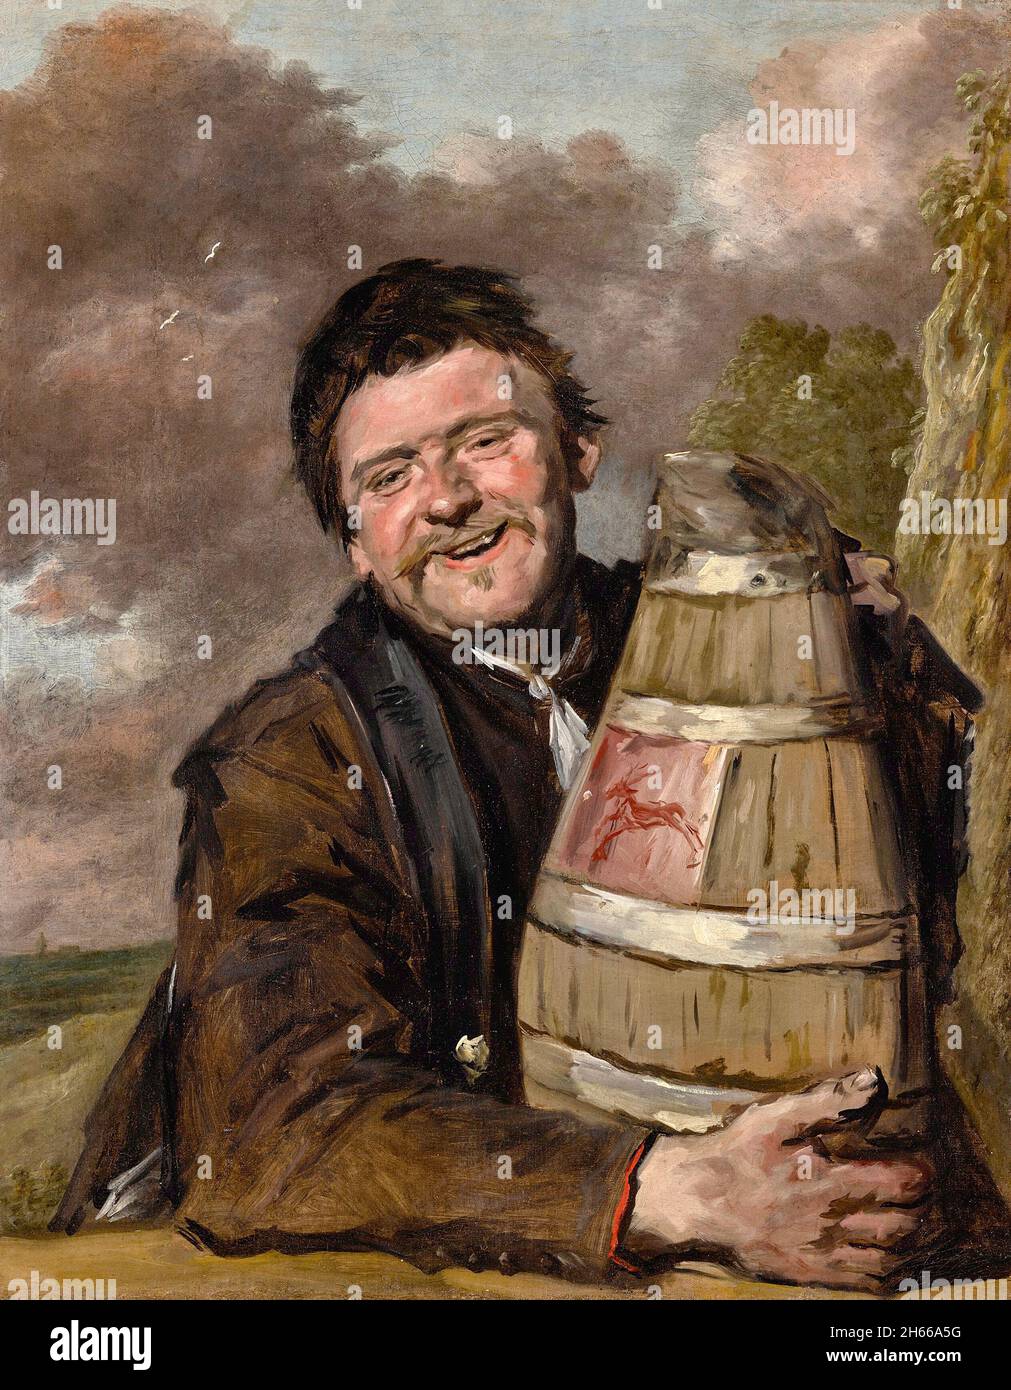 Frans Hals artwork - Portrait of a Fisherman - 1630 - Man with a Beer Jug Stock Photo